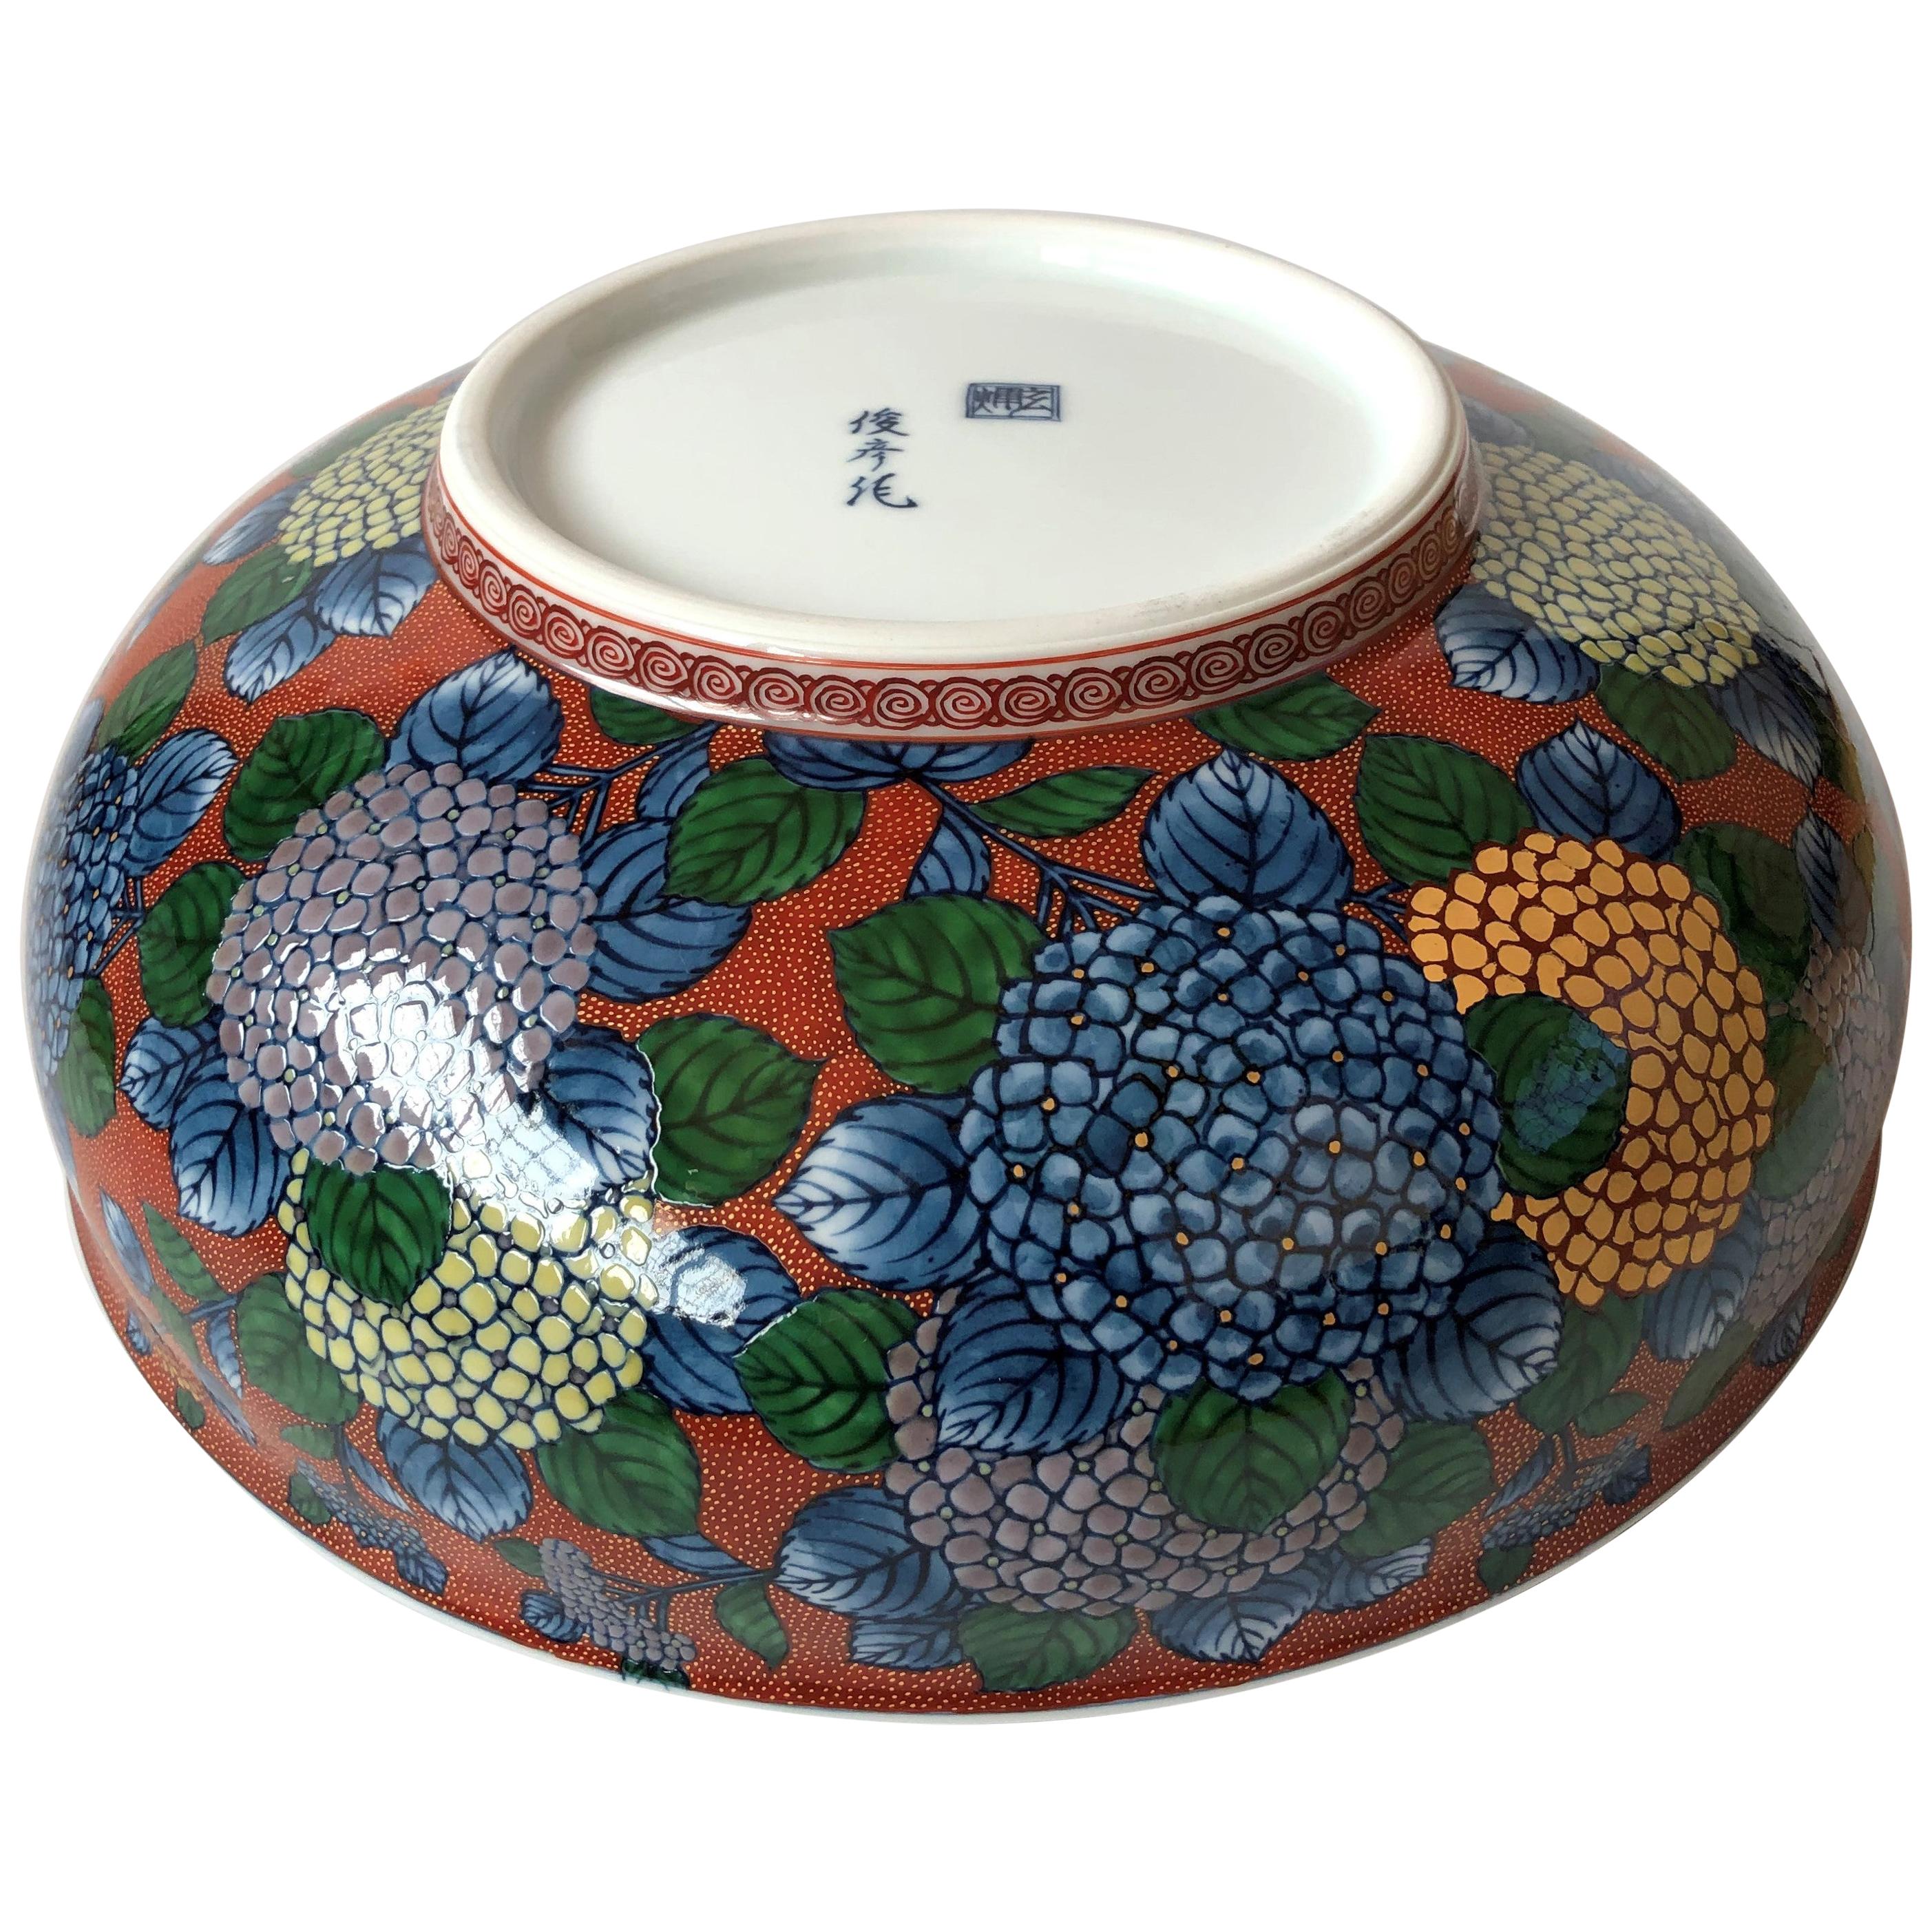 Exceptional Japanese contemporary museum-quality gilded decorative porcelain bowl, intricately hand painted on an elegantly shaped body in red and blue, a signed masterpiece by second-generation master porcelain artist of the Imari-Arita region of